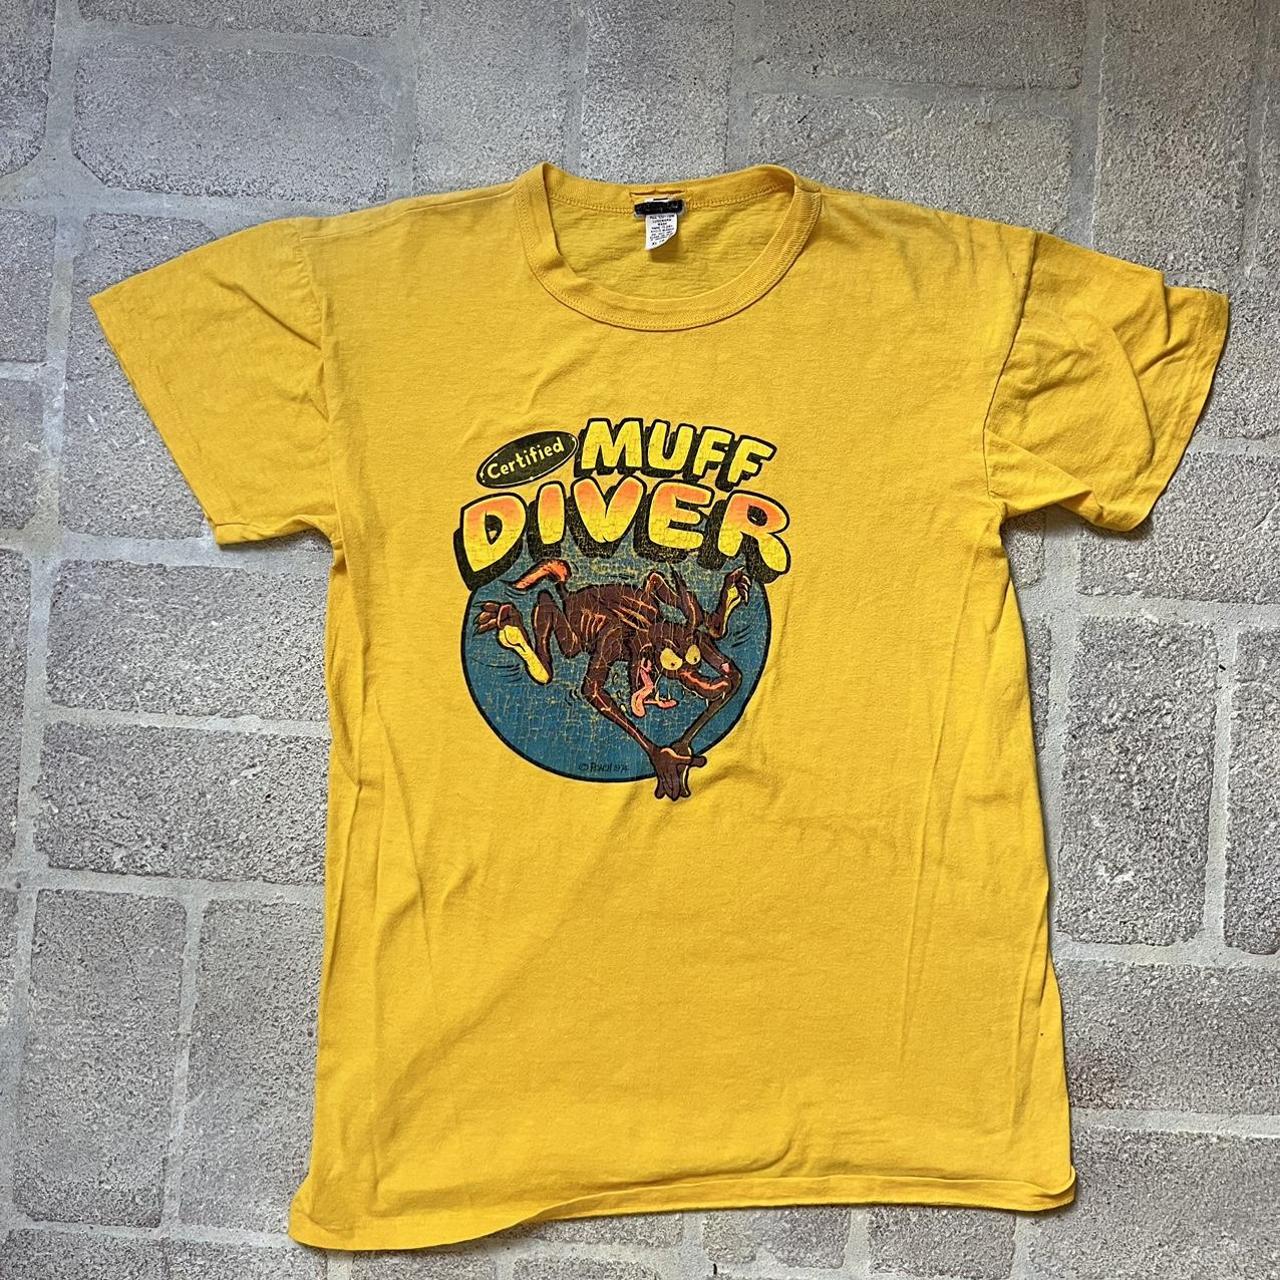 Vintage Muff Diver Tee Graphic Is Worn As Shown But Depop 1913